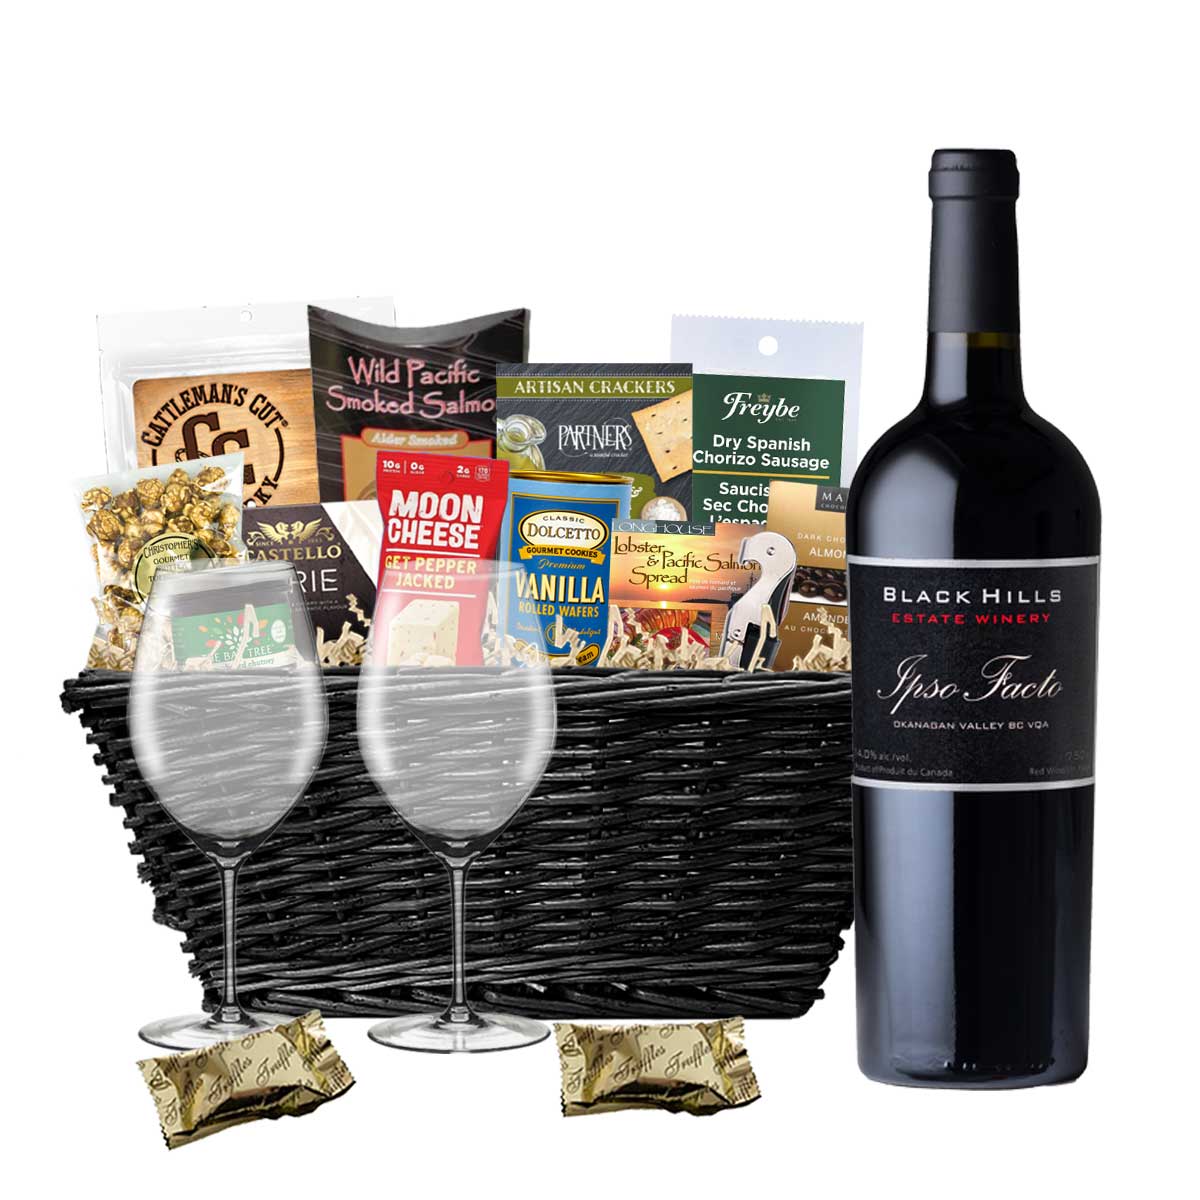 TAG Liquor Stores BC - Black Hills Winery Ipso Facto Red Blend 750ml Gift Basket